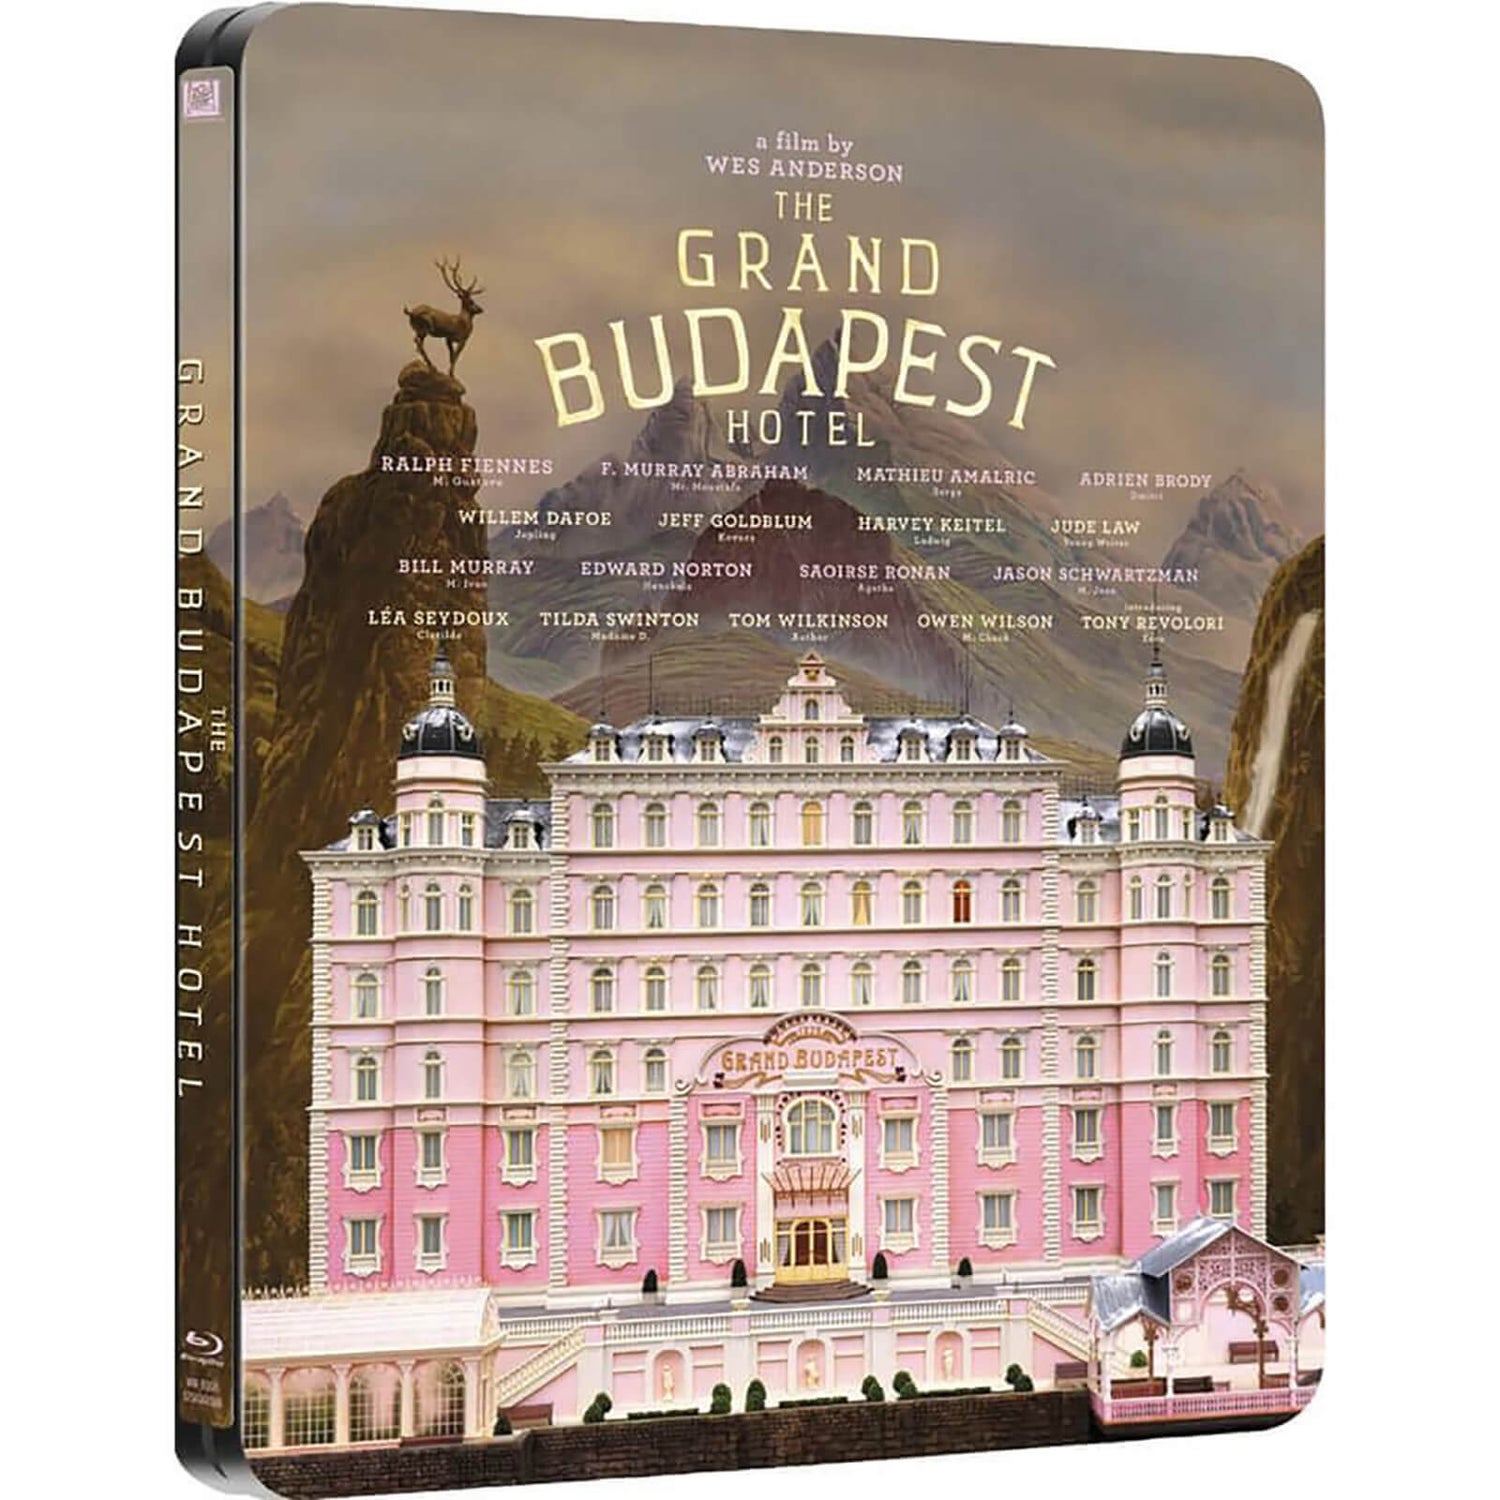 Grand Budapest Hotel - Zavvi Exclusive Limited Edition Steelbook (Limited to 2000 Copies)